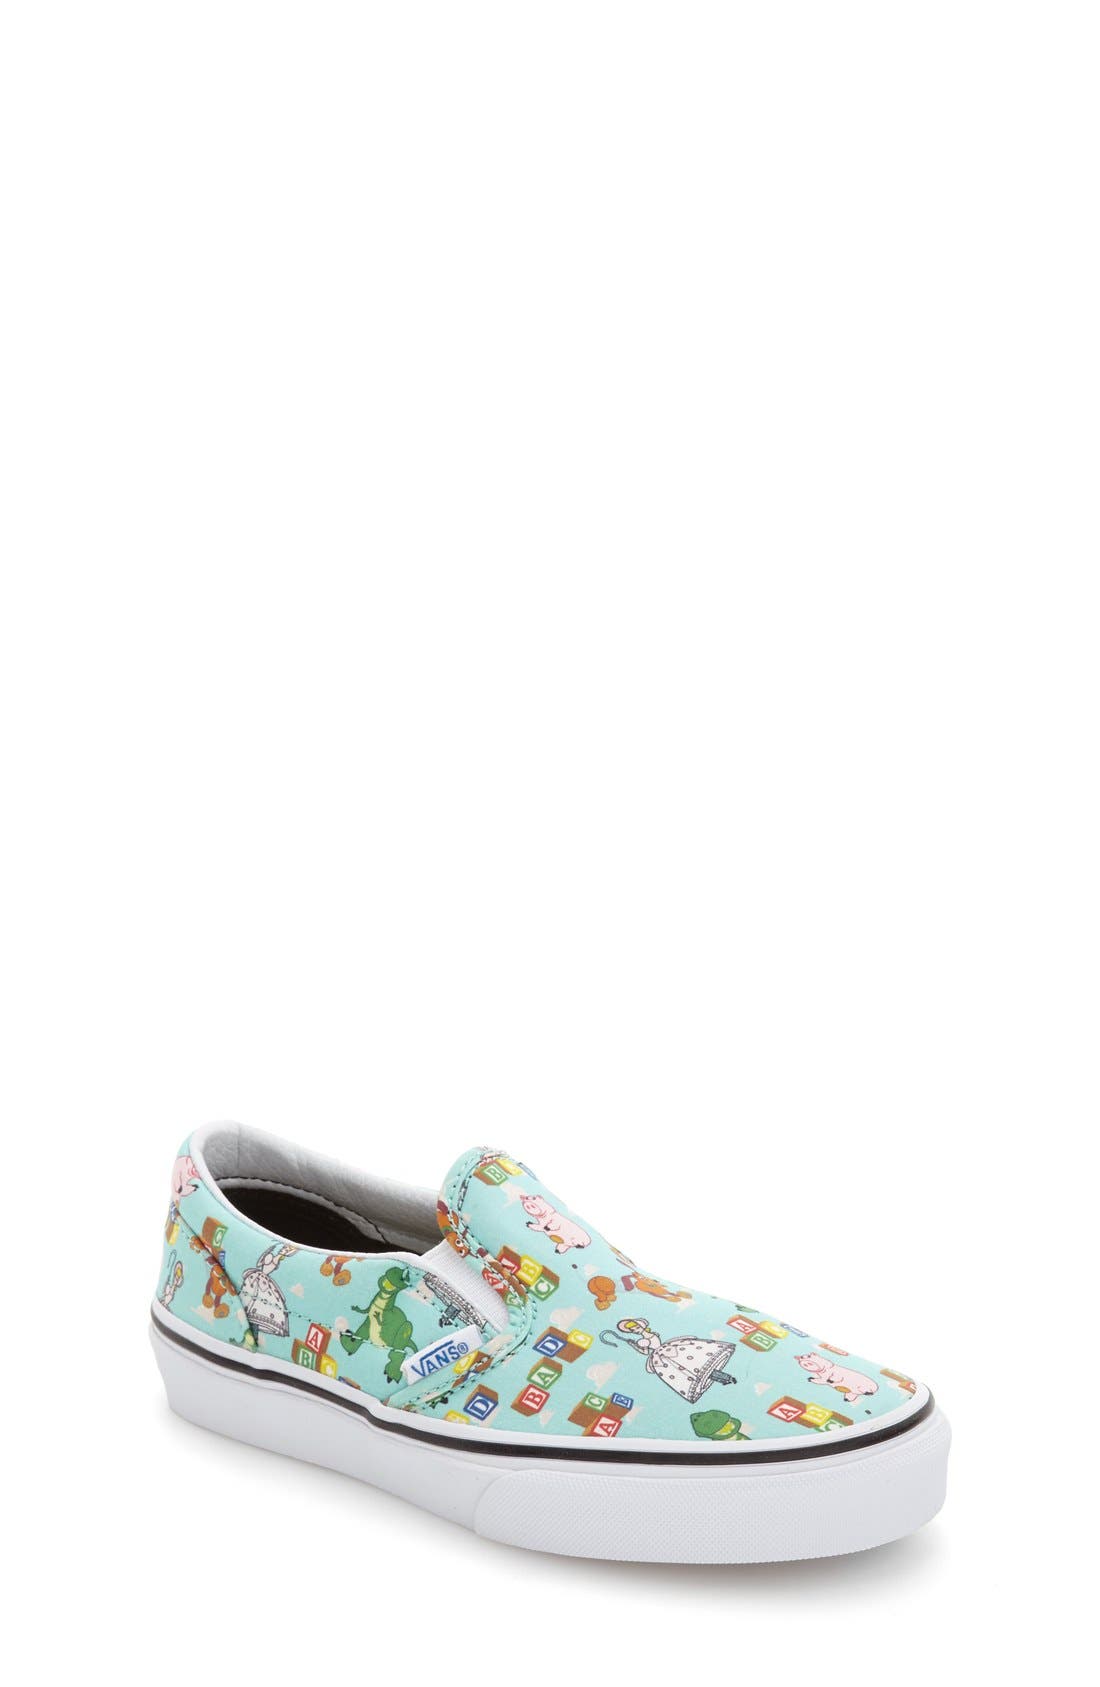 toy story vans canada